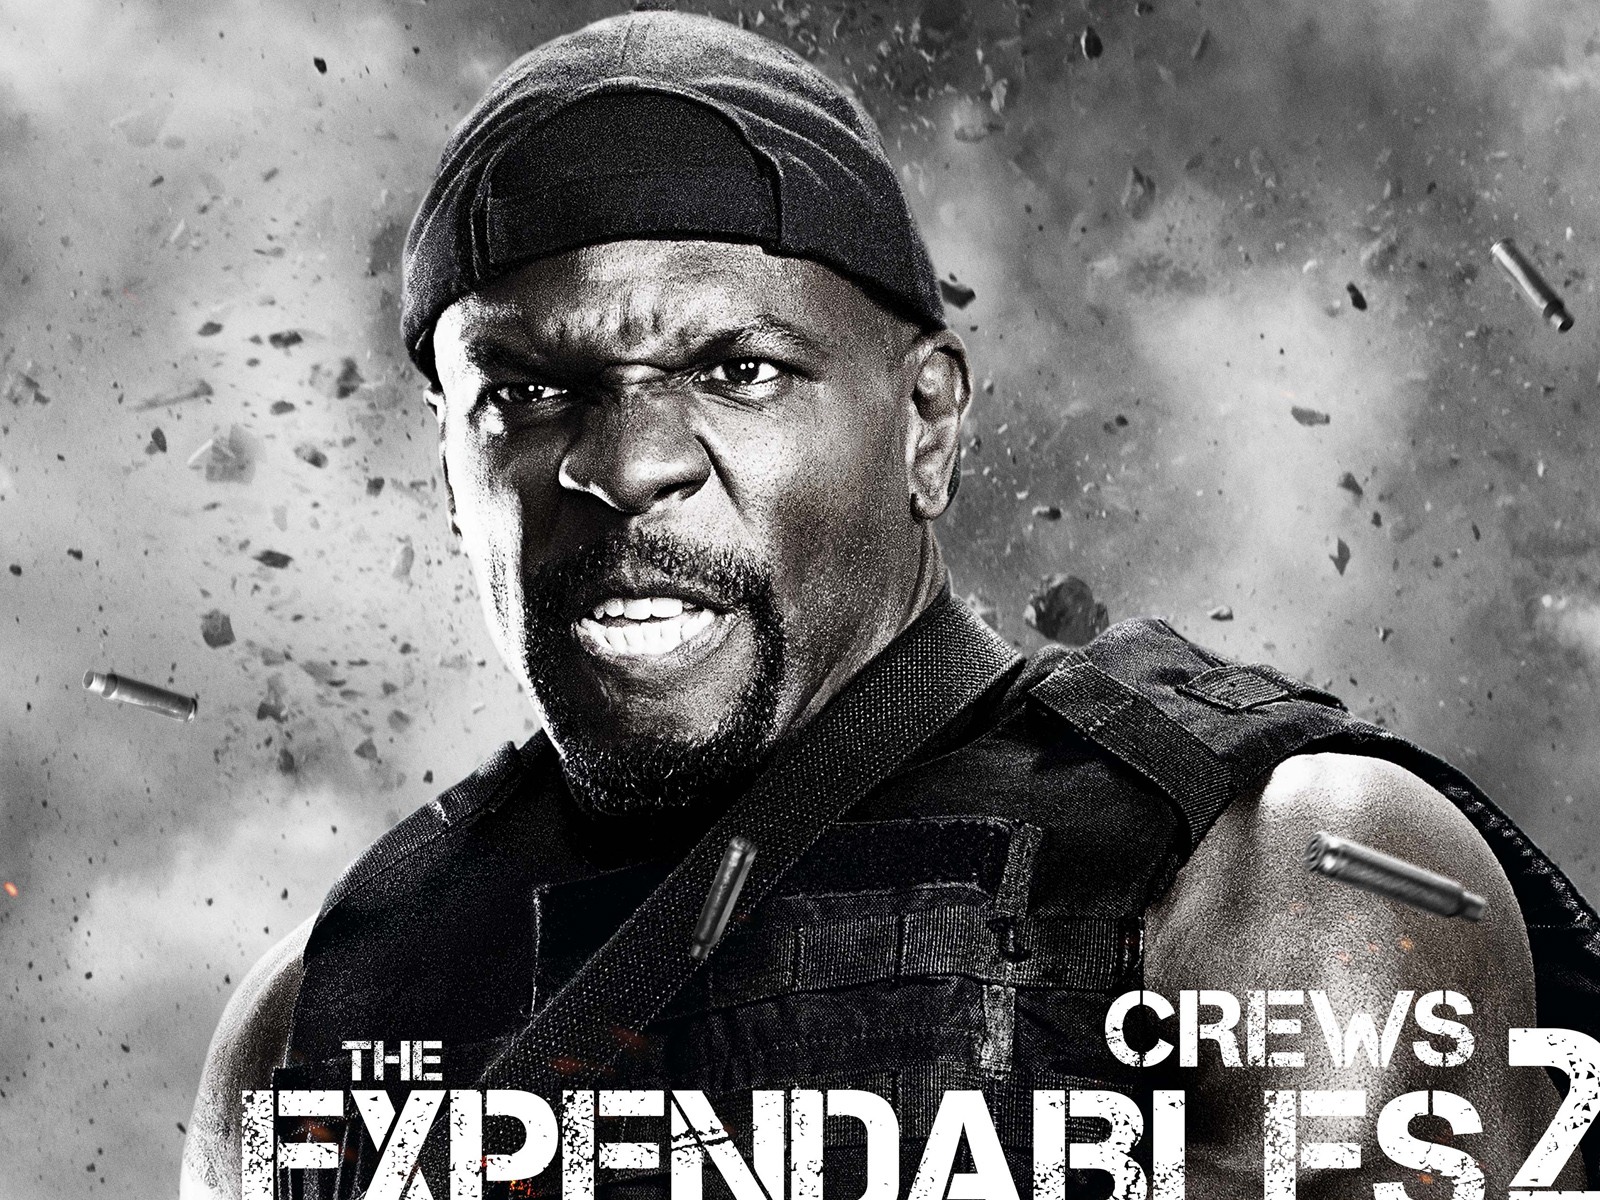 2012 Expendables2 HDの壁紙 #10 - 1600x1200